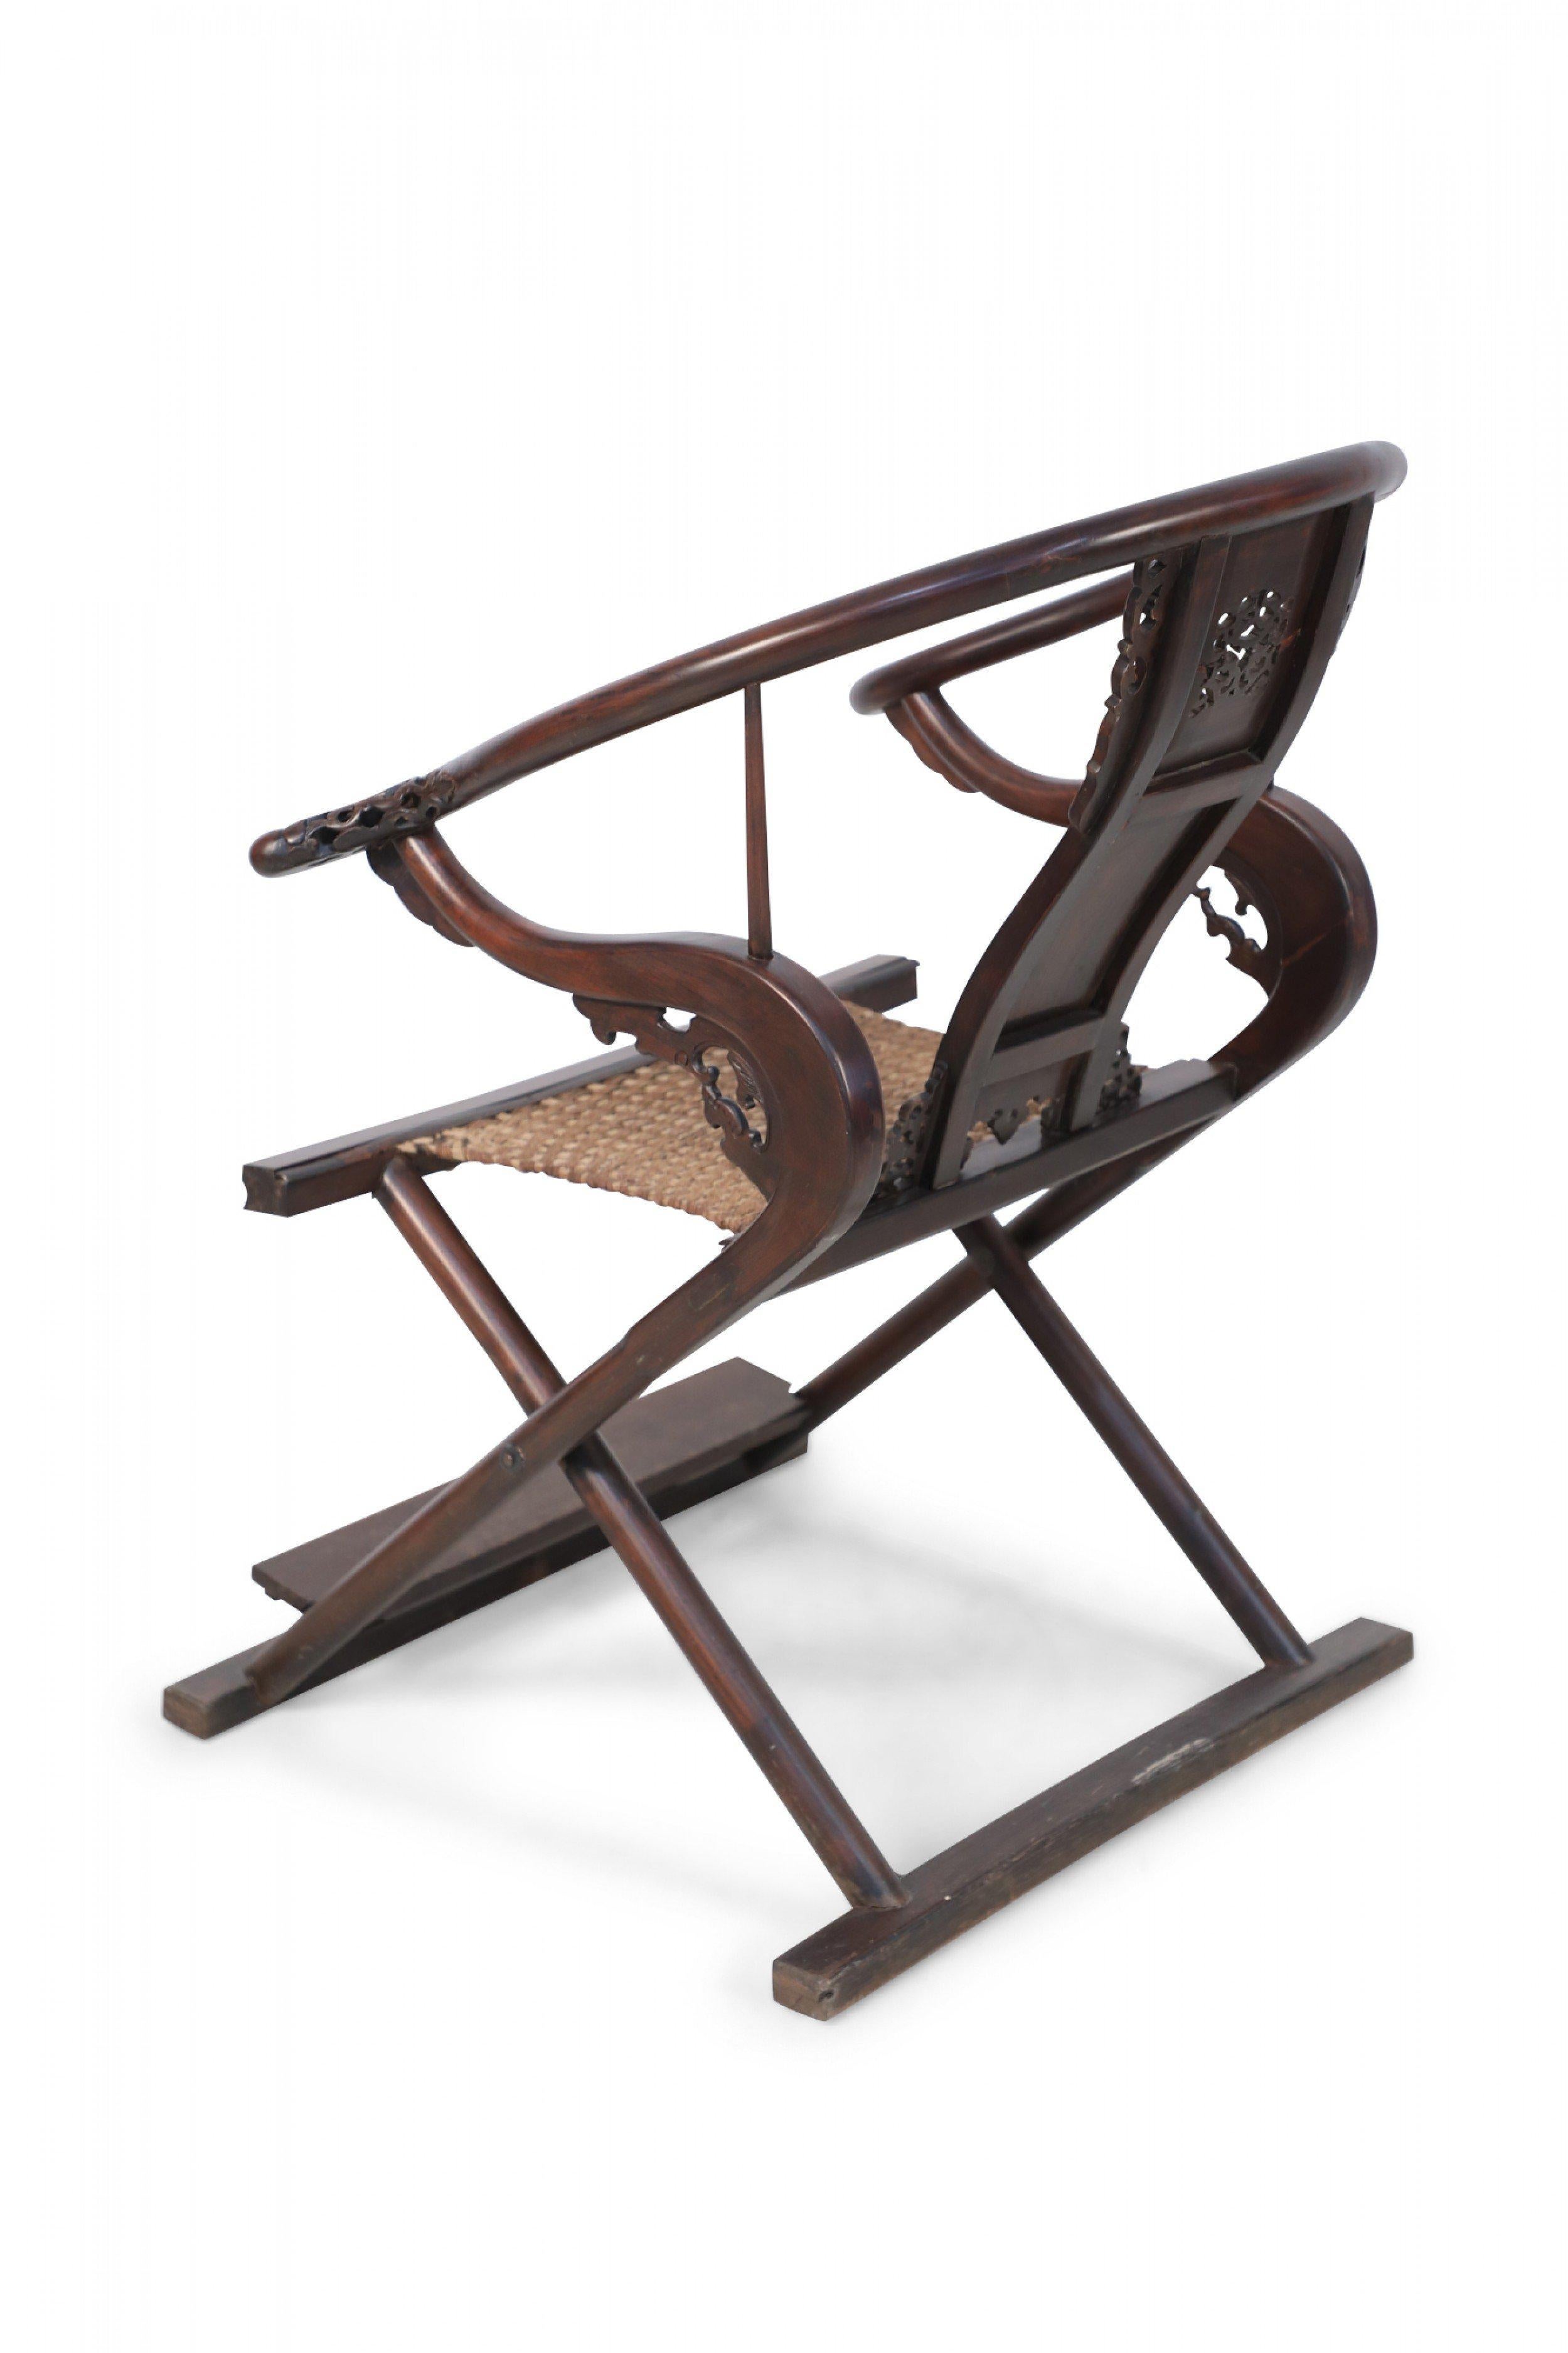 ancient folding chair